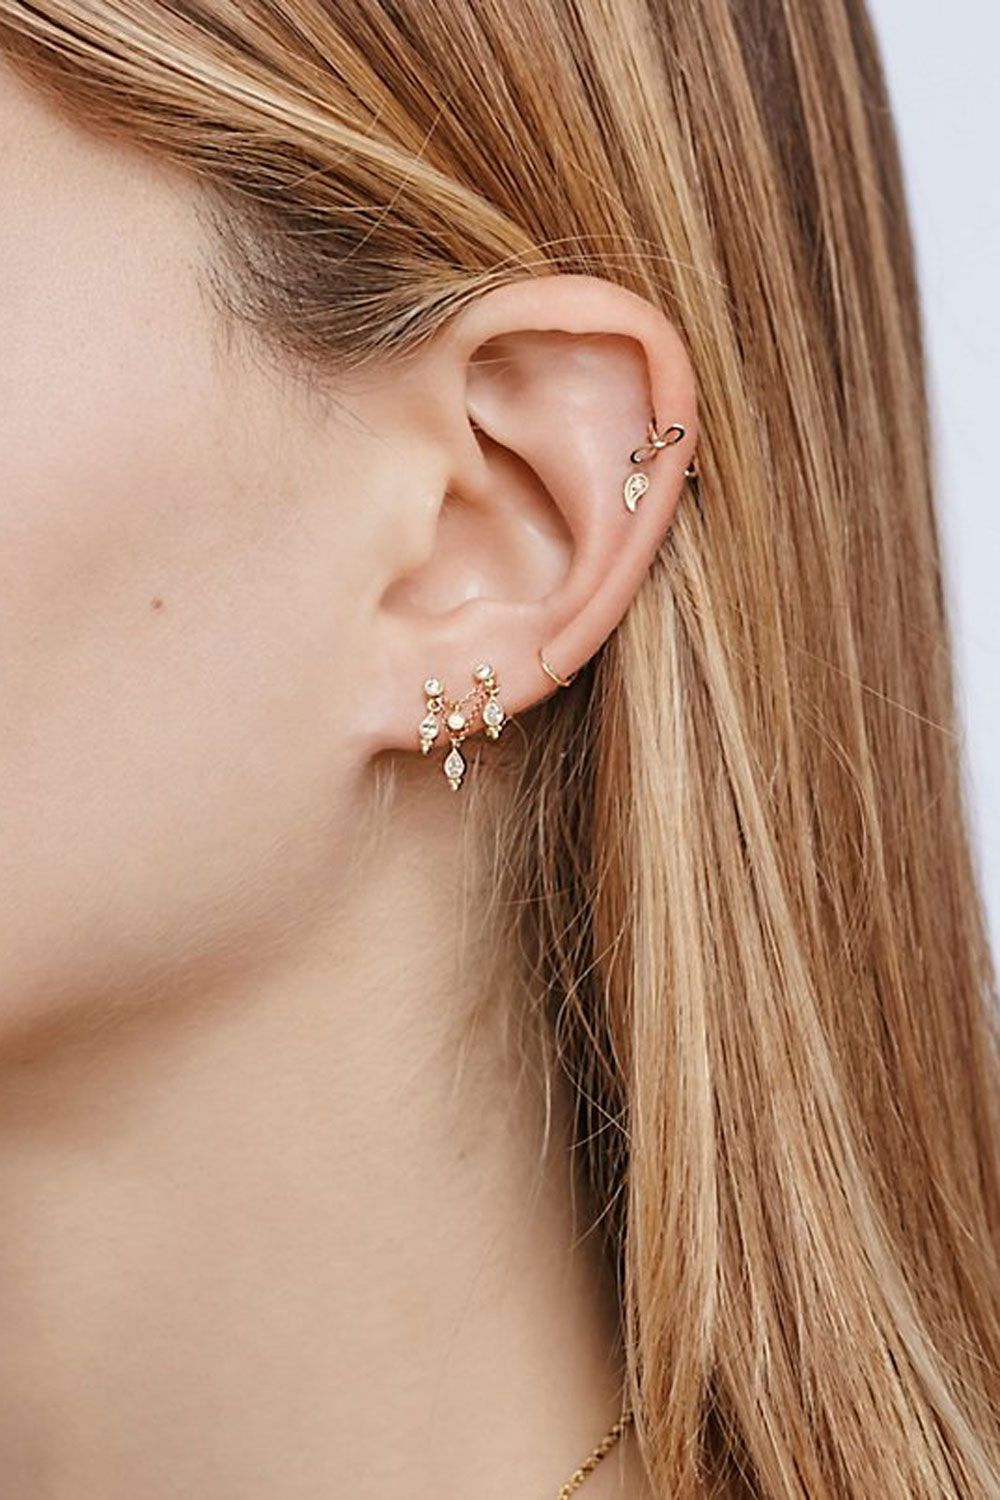 30 Tiny Earrings Youll Totally Love